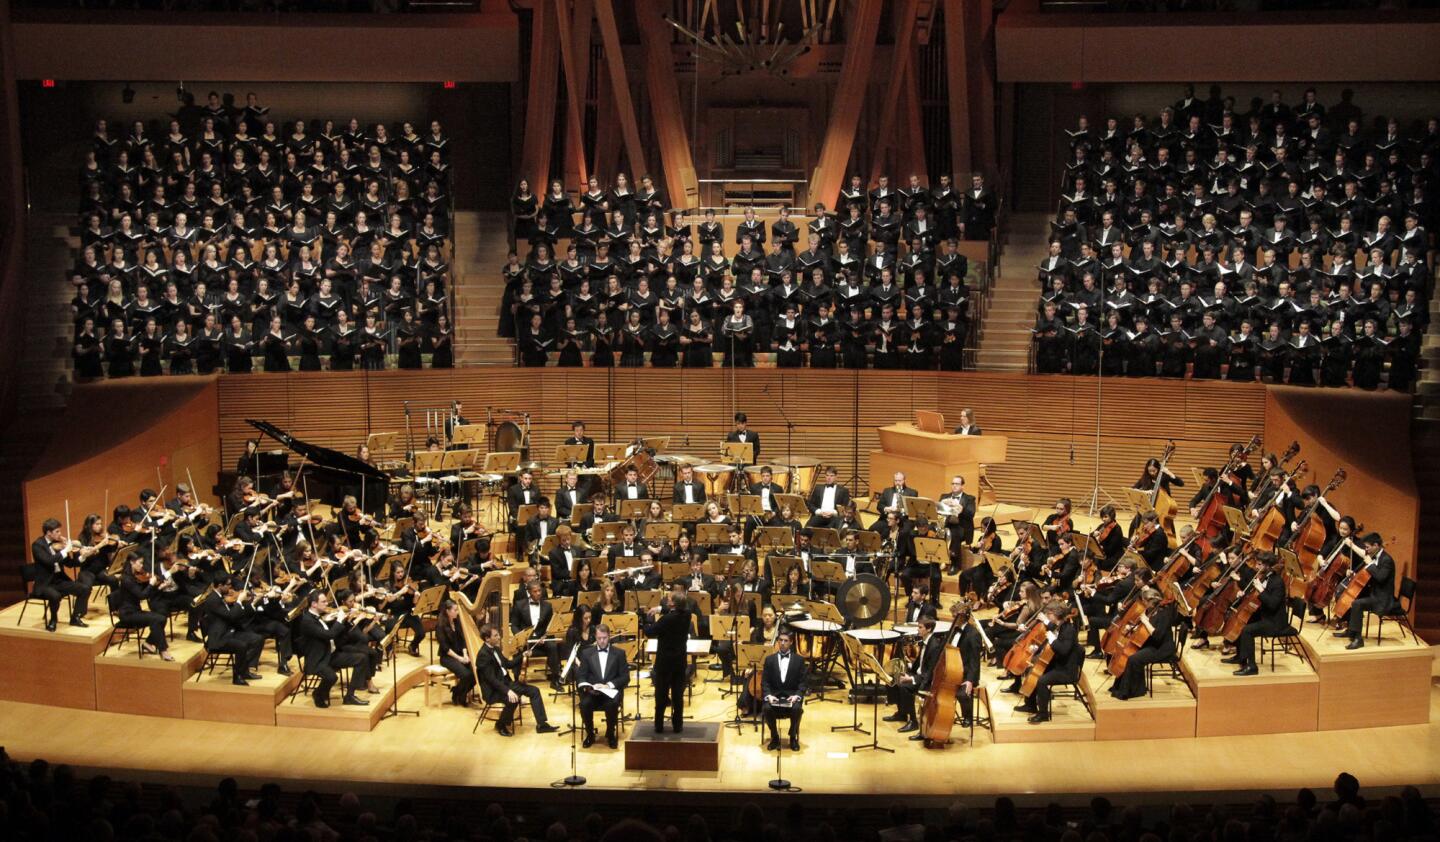 James Conlon conducts the Colburn Orchestra and members of USC Thornton Symphony with six University choruses from Southern California and New Zealand and the Los Angeles Children's Chorus in Britten's War Requiem at the Walt Disney Concert Hall on Nov. 25, 2013.